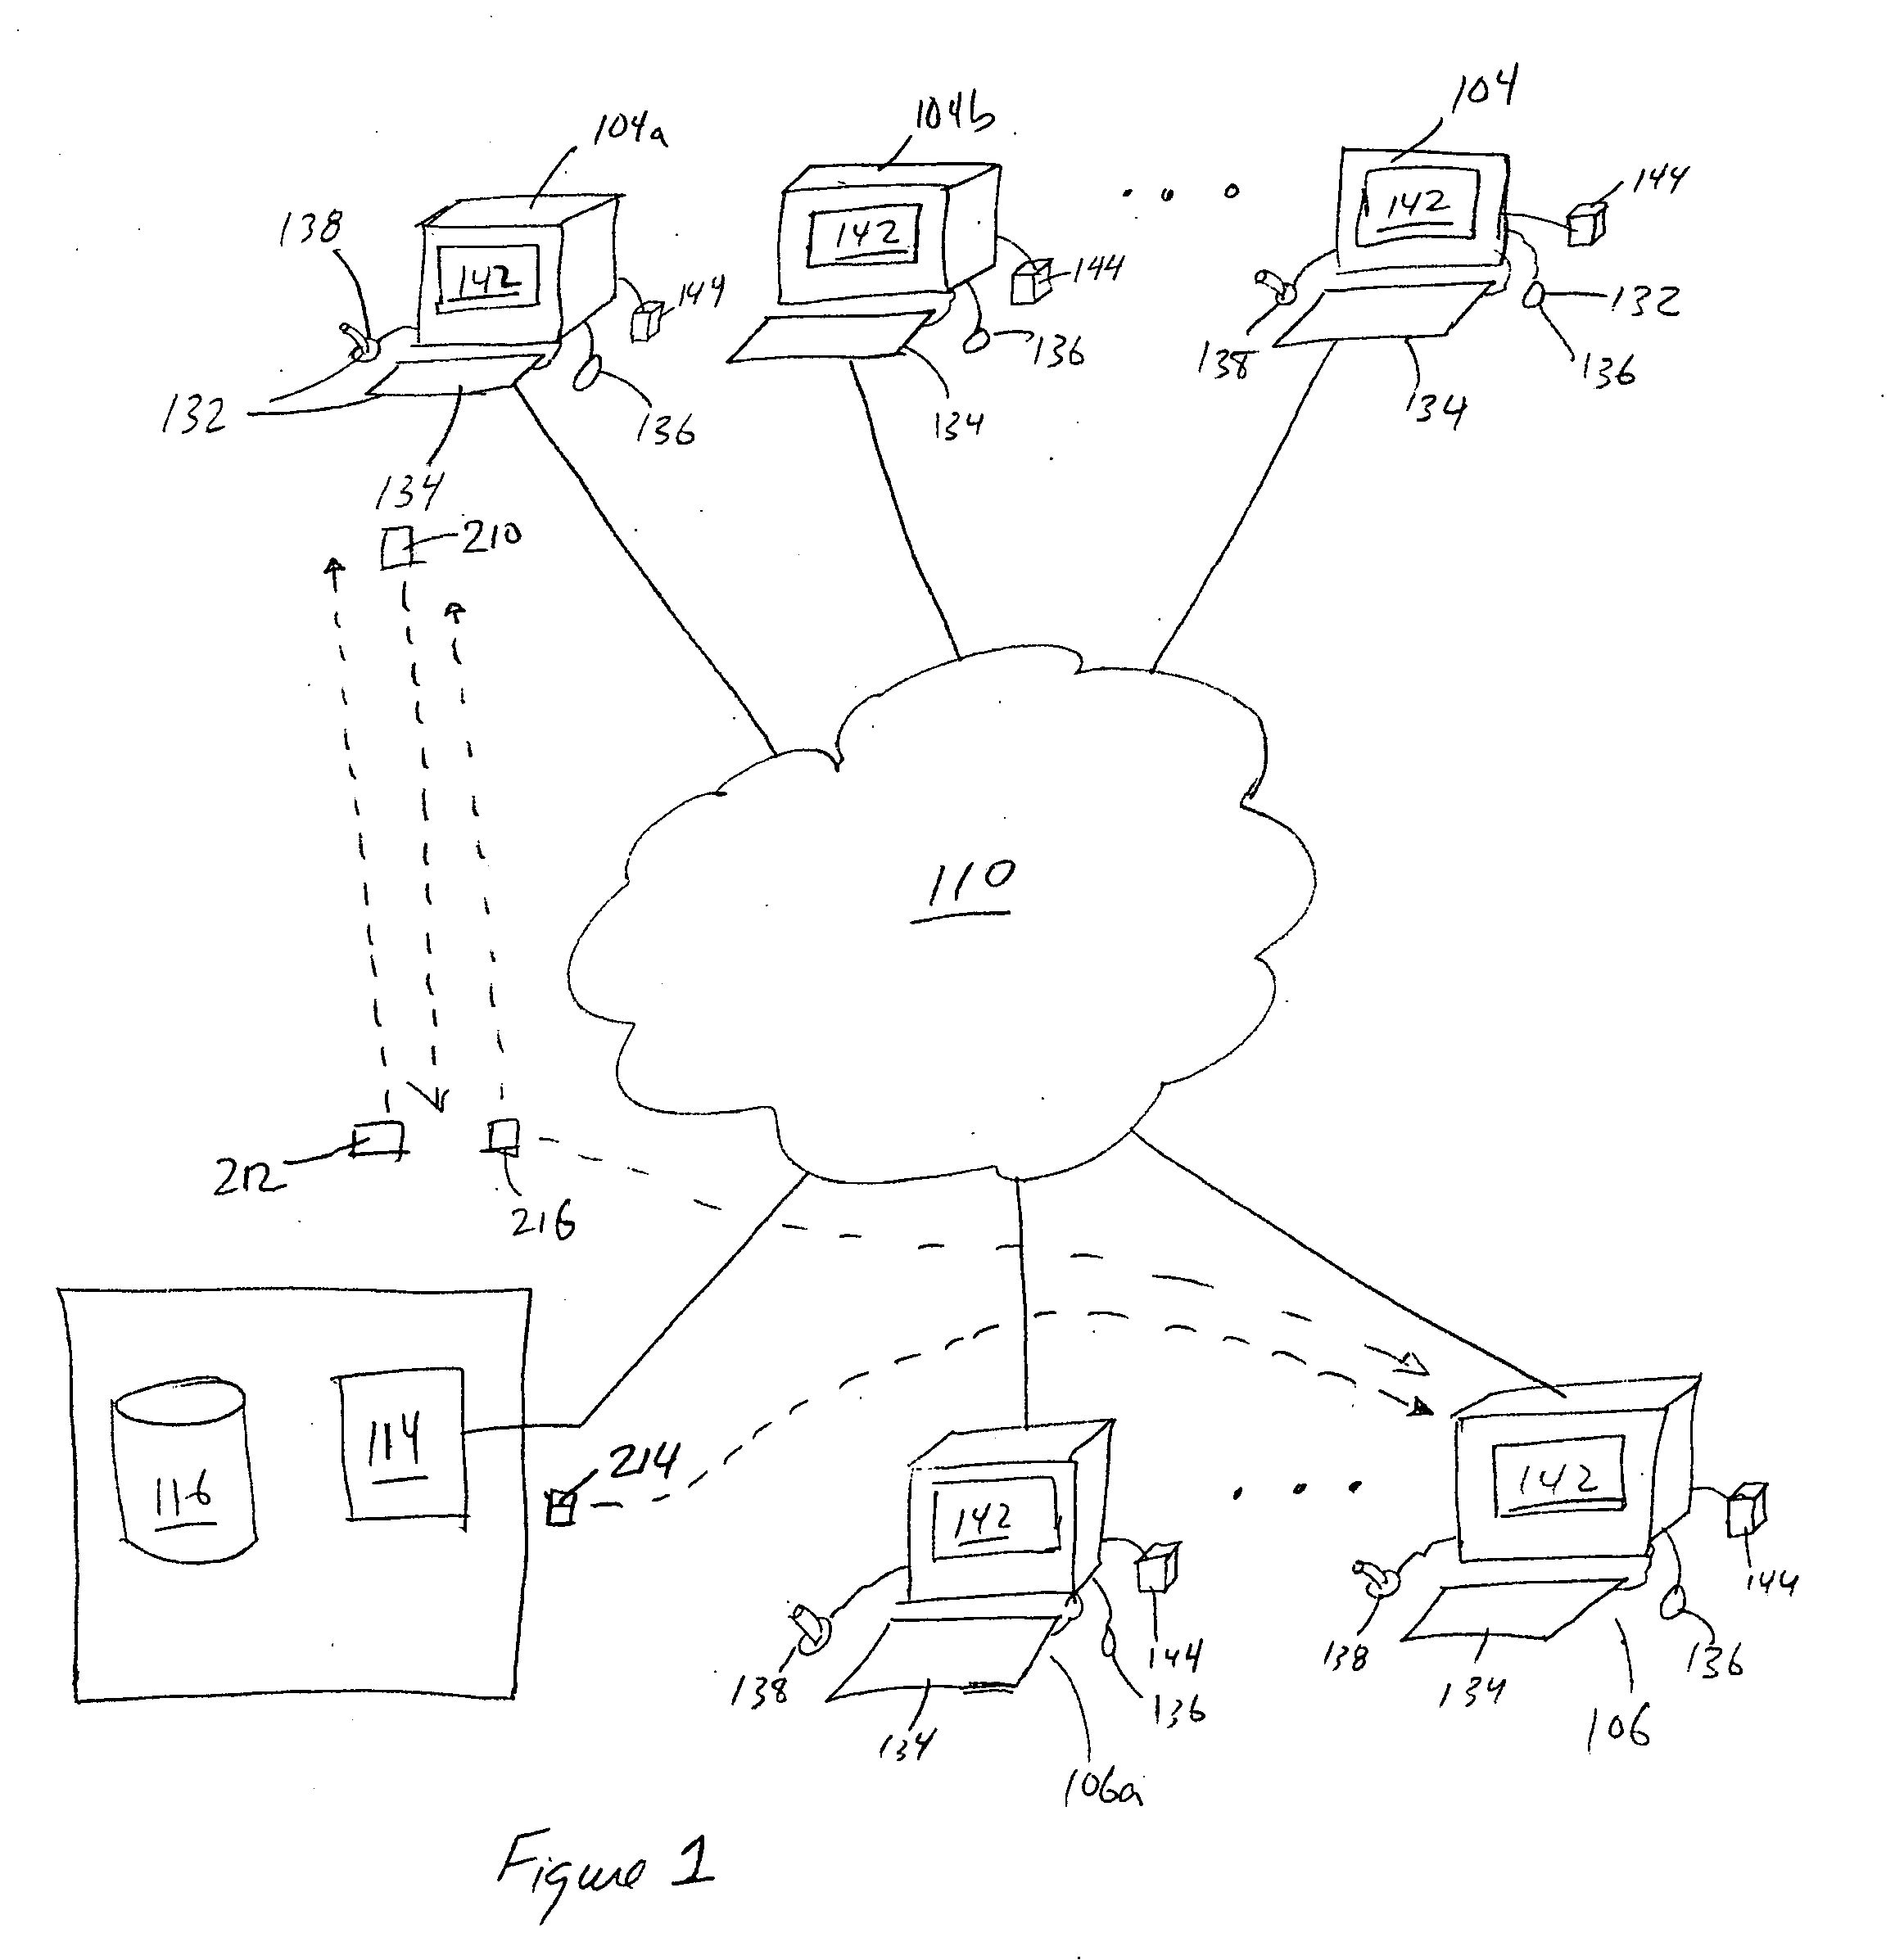 Systems and methods for interactively displaying product information and for collaborative product design